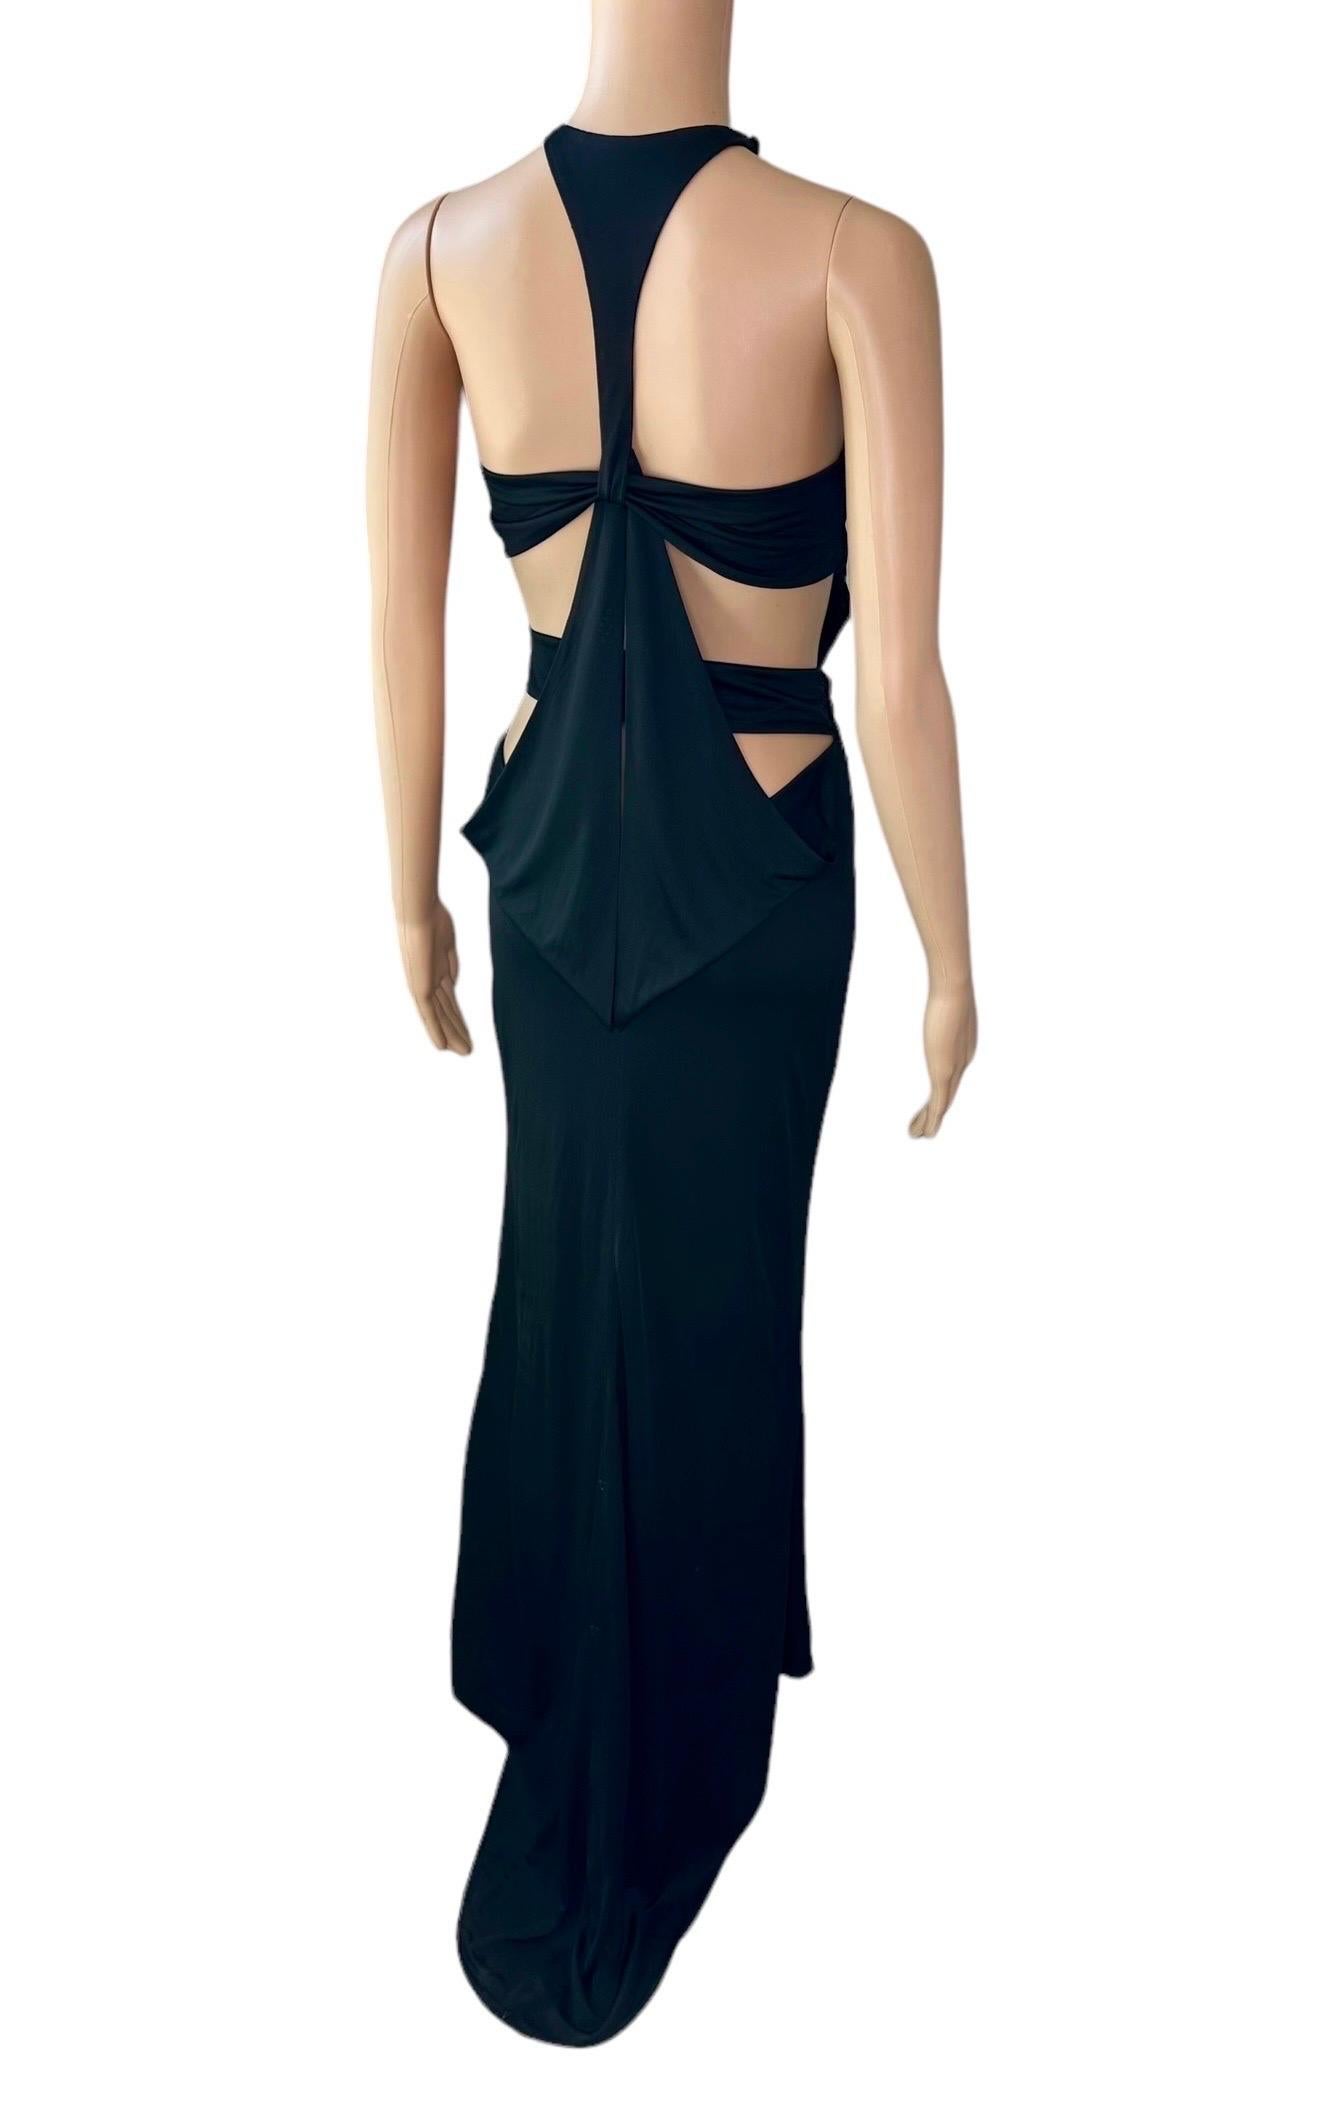 Tom Ford for Gucci F/W 2004 Embellished Plunging Cutout Black Evening Dress Gown 3